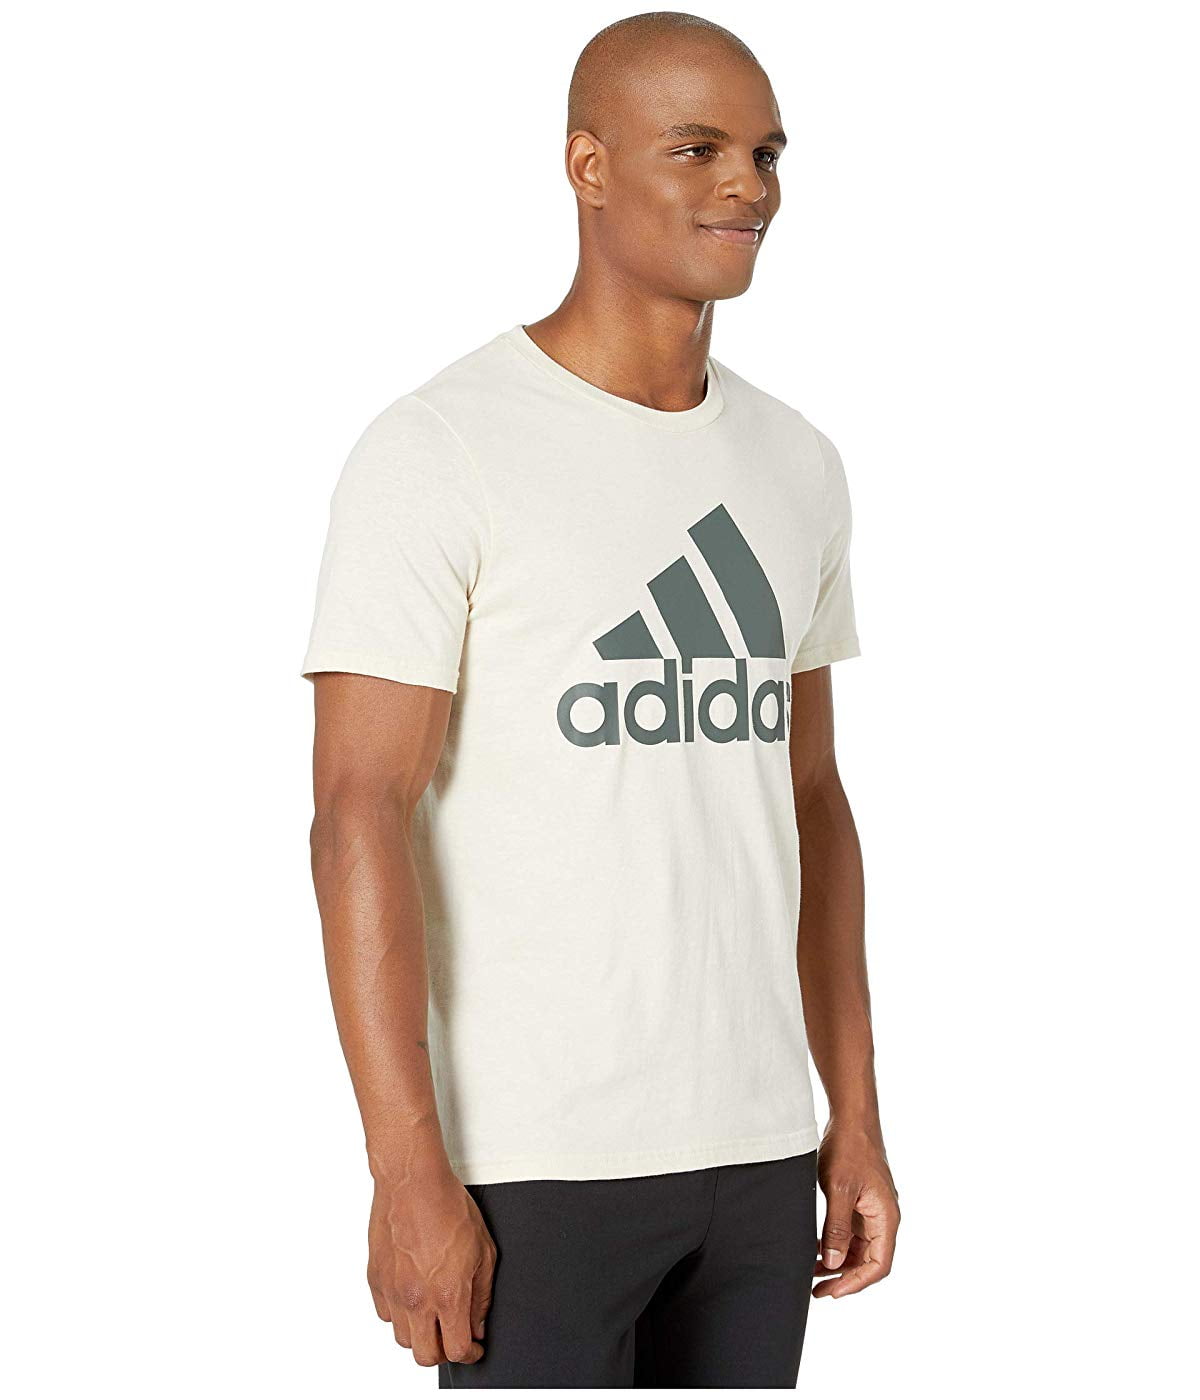 Adidas Men's Basic Bos Tee Sport Shirt T-Shirt Athletic Work Out